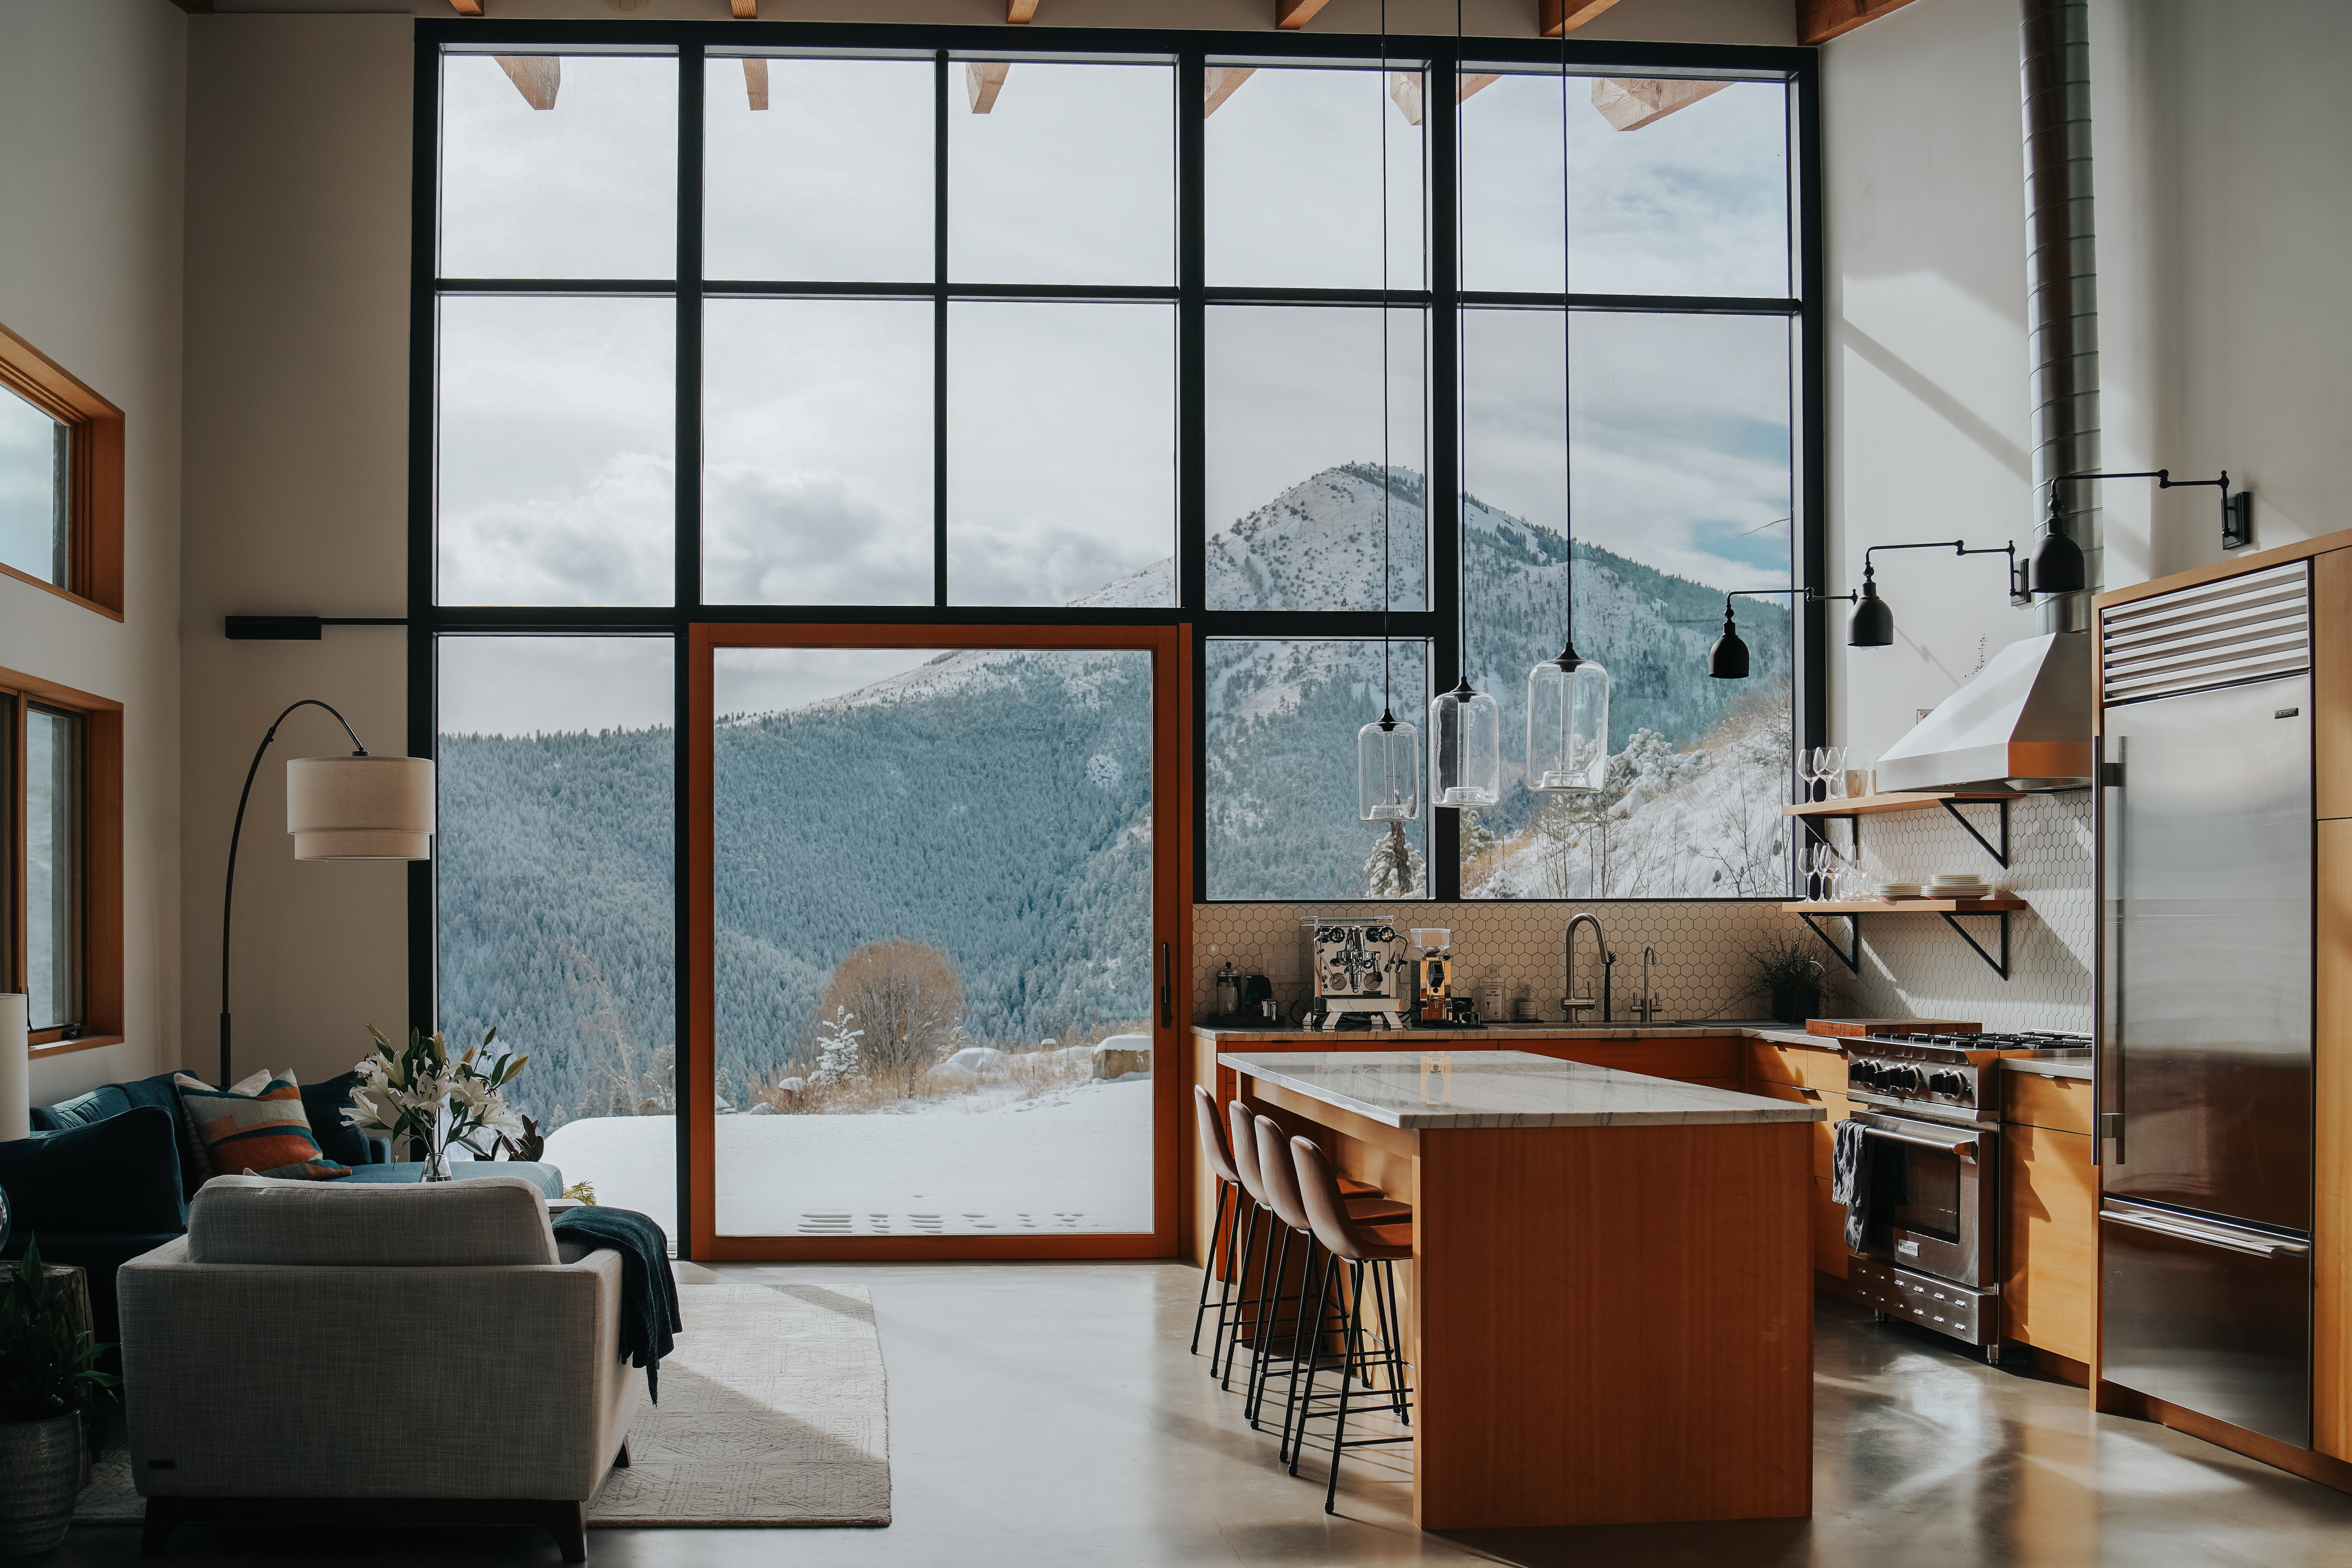 Secluded modern mountain home with stunning views - Houses for Rent in  Boulder, Colorado, United States - Airbnb